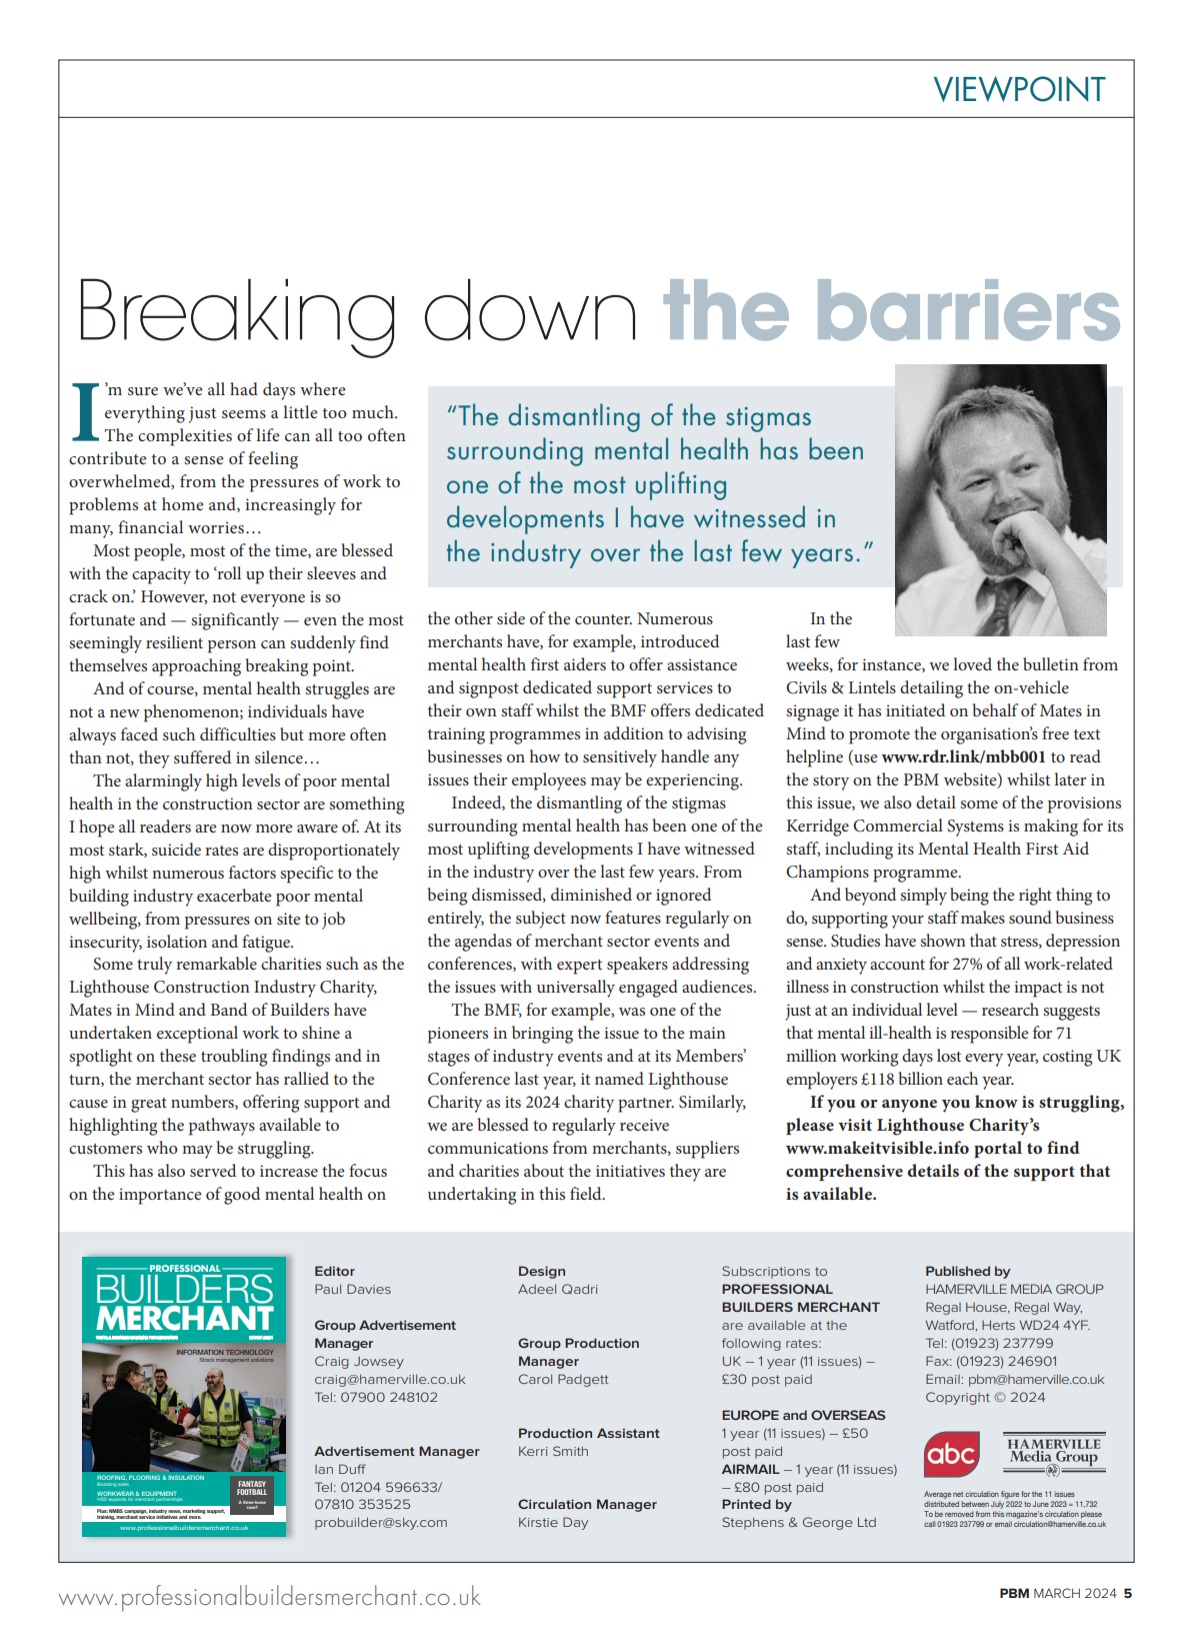 Writing in the March edition of PBM, Editor Paul Davies discussed the all-round importance of effective mental health support for those in the industry.